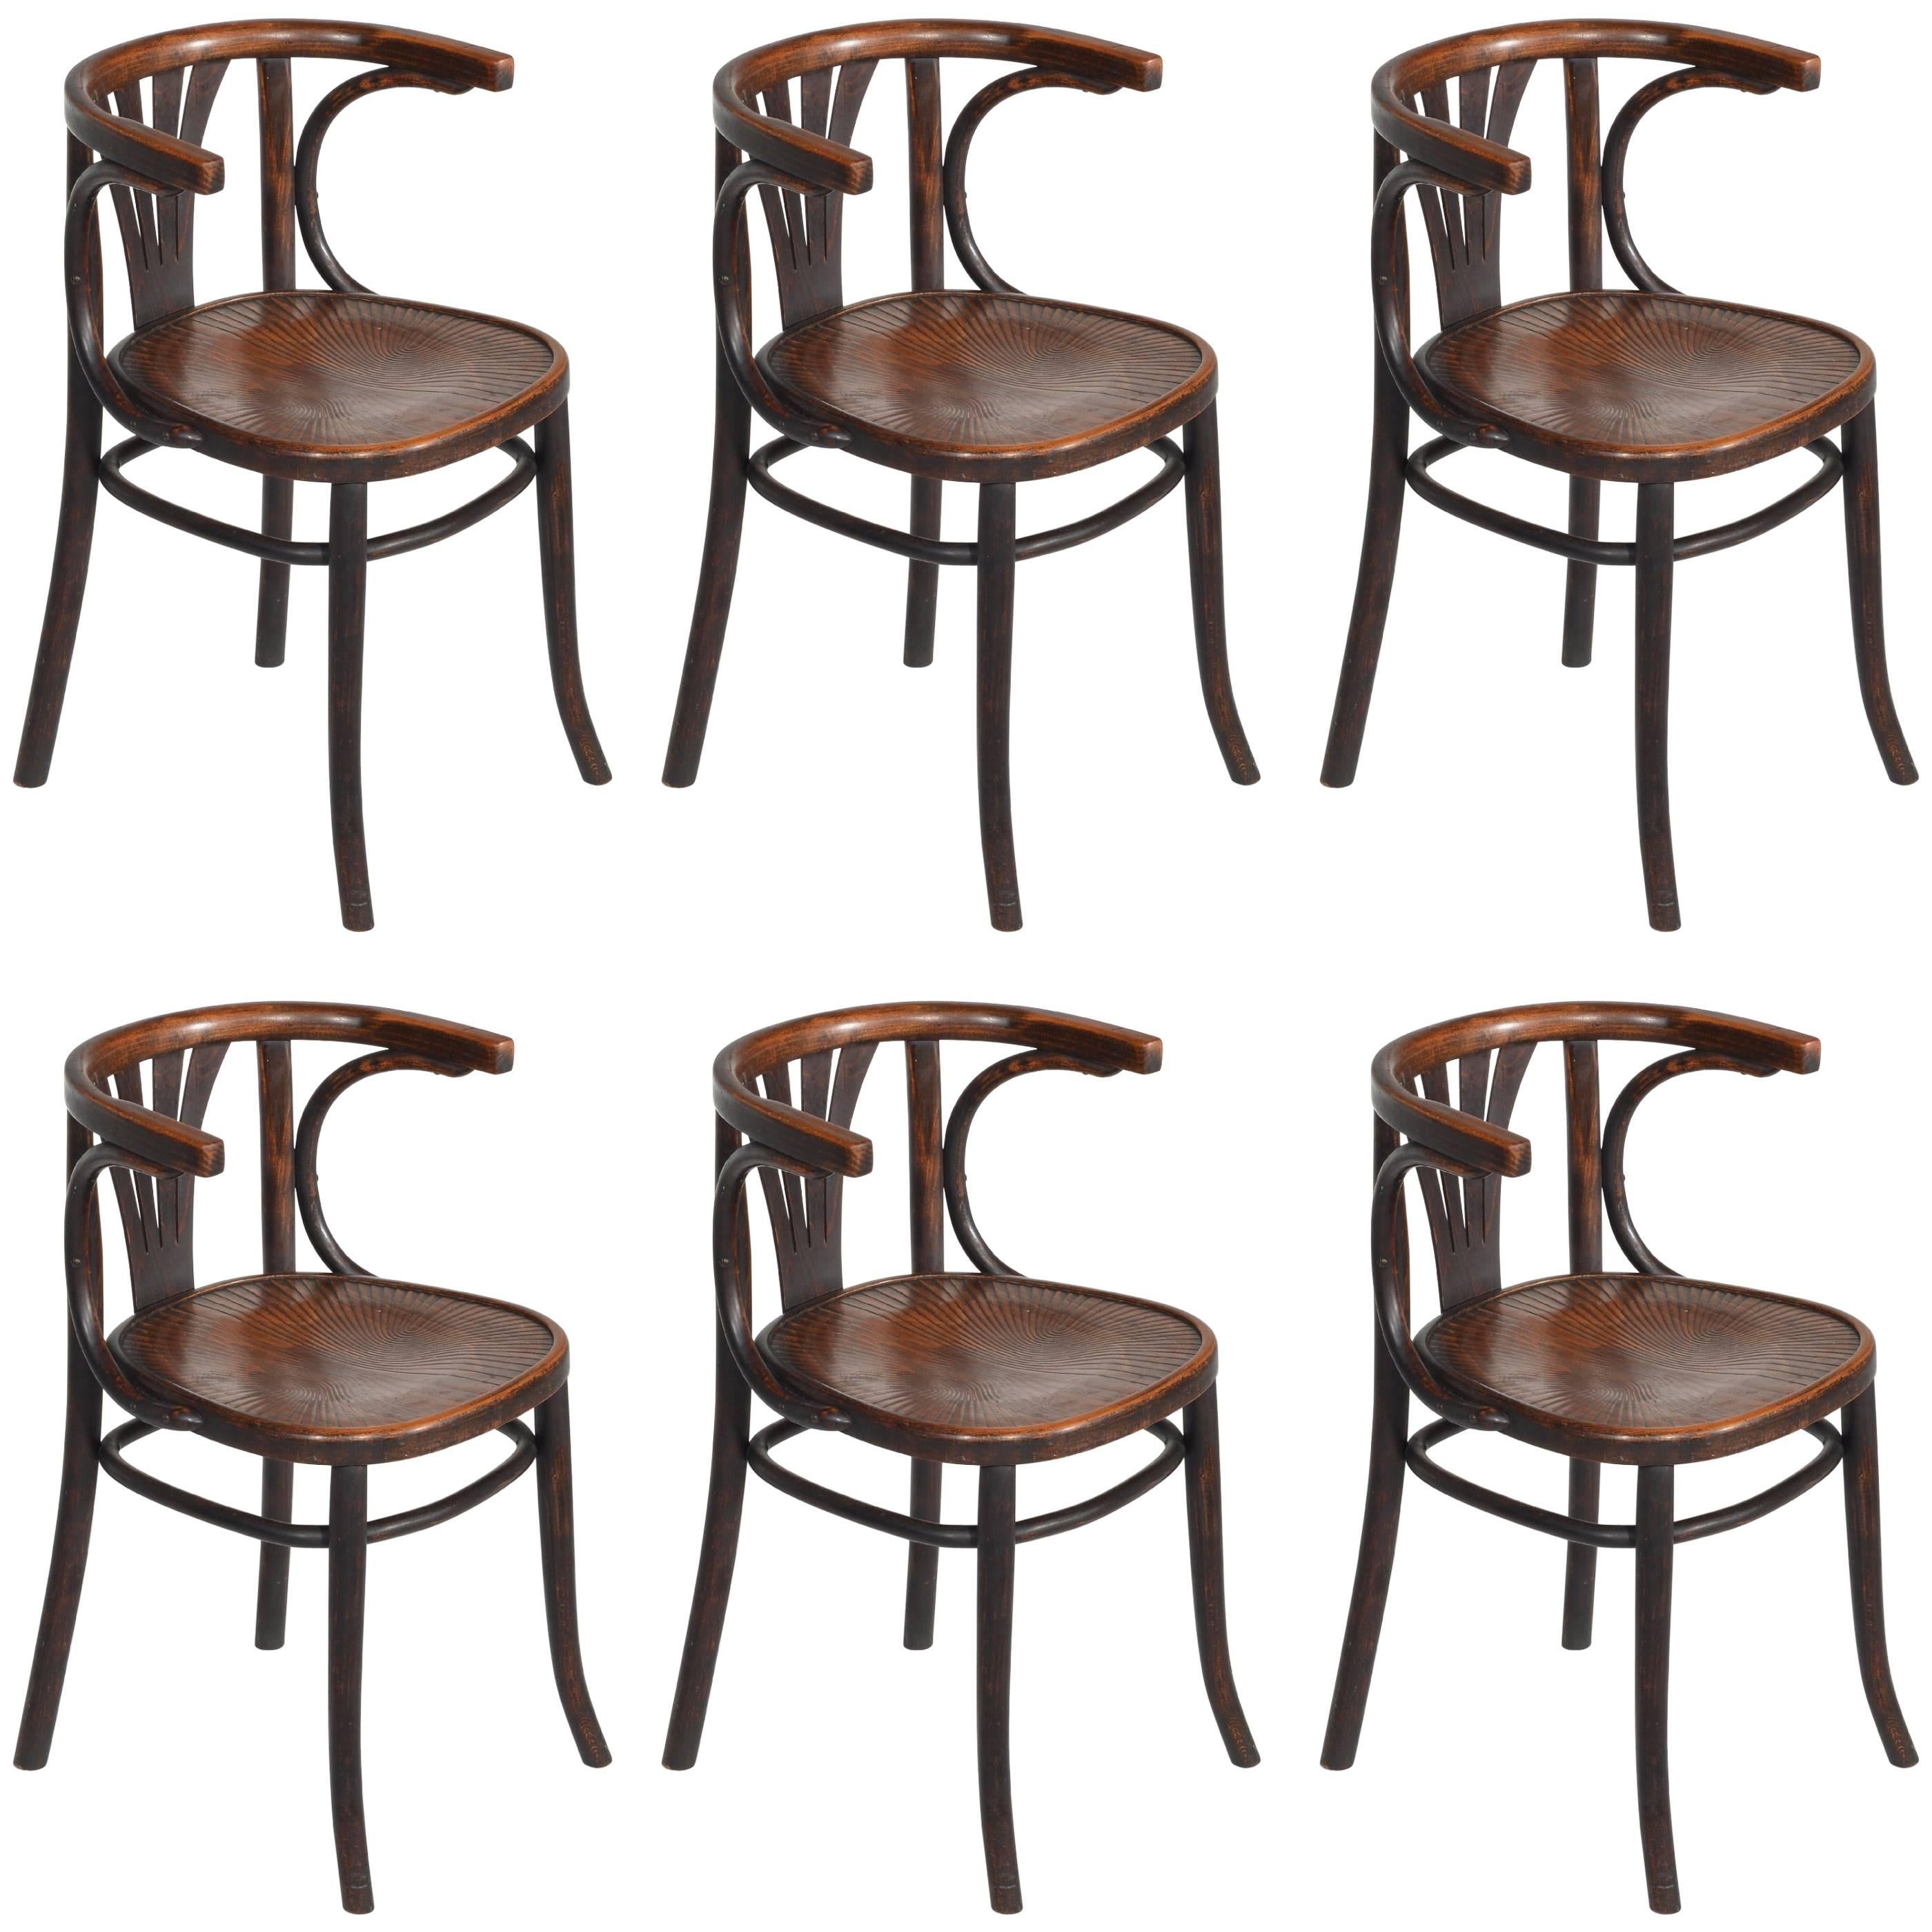 Set of Six Turn of the Century Thonet Bentwood Chairs